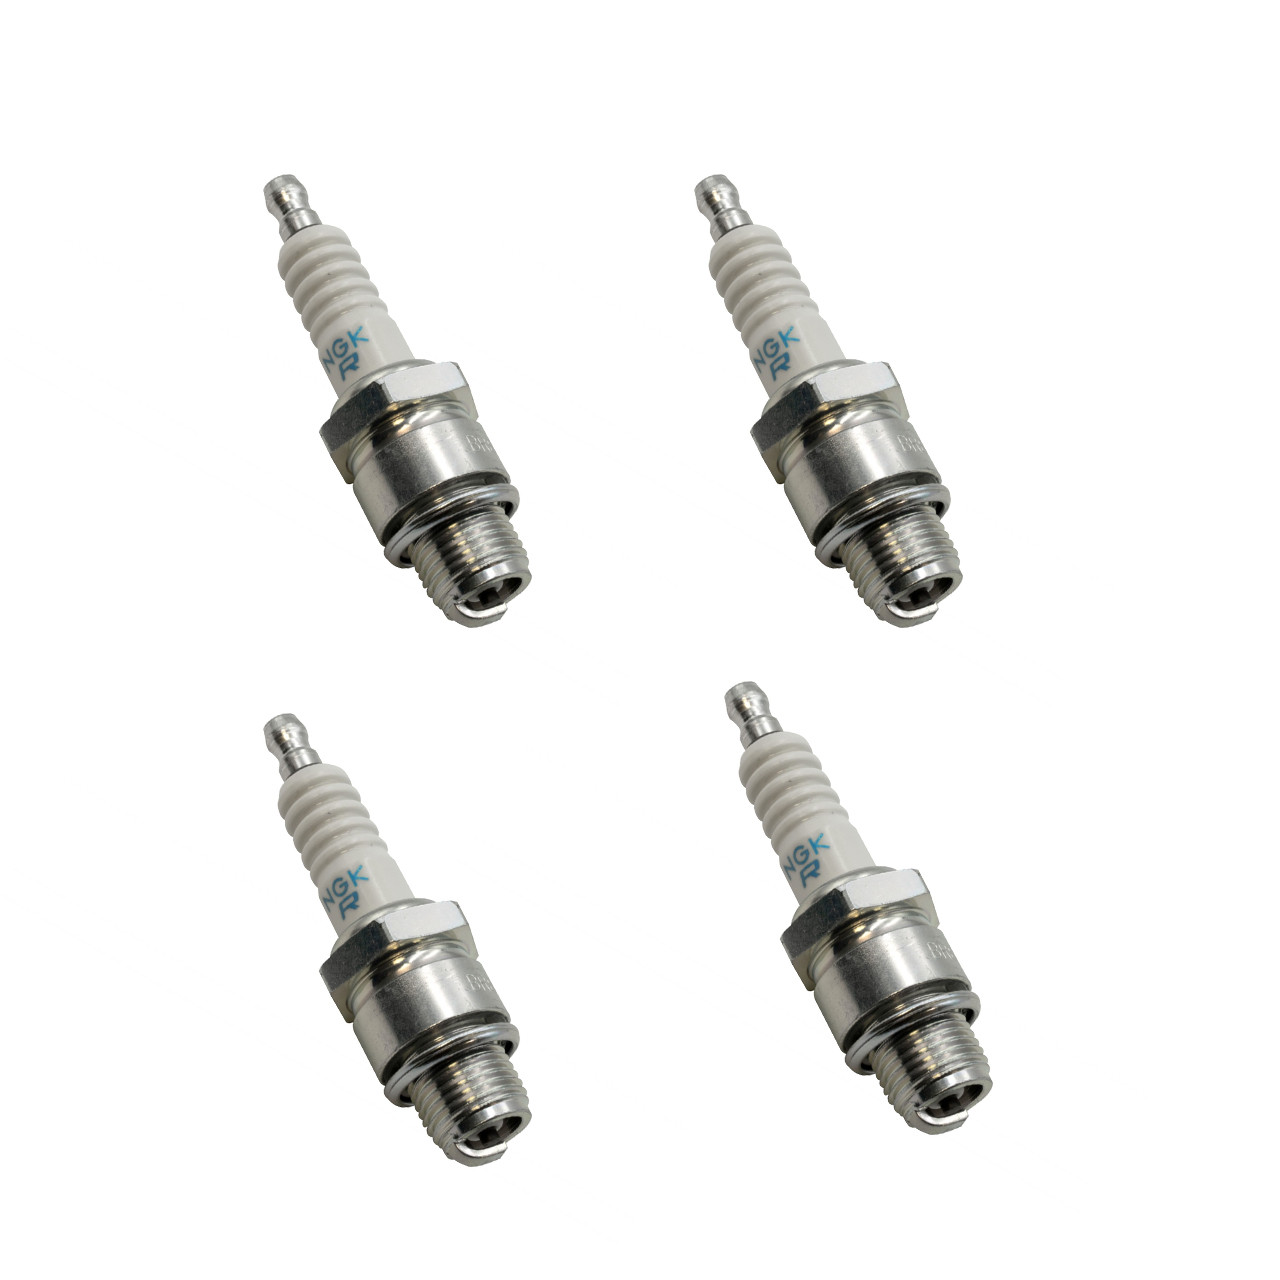 NGK-NG3922-SET - NGK - SET OF 4 SPARK PLUGS - SHORT 14MM - REPLACEMENT FOR  W8AC / WR8AC / WR8AC+ / B6HS / BP6HS - BEETLE 46-79 - GHIA 56-74 - BUS ...